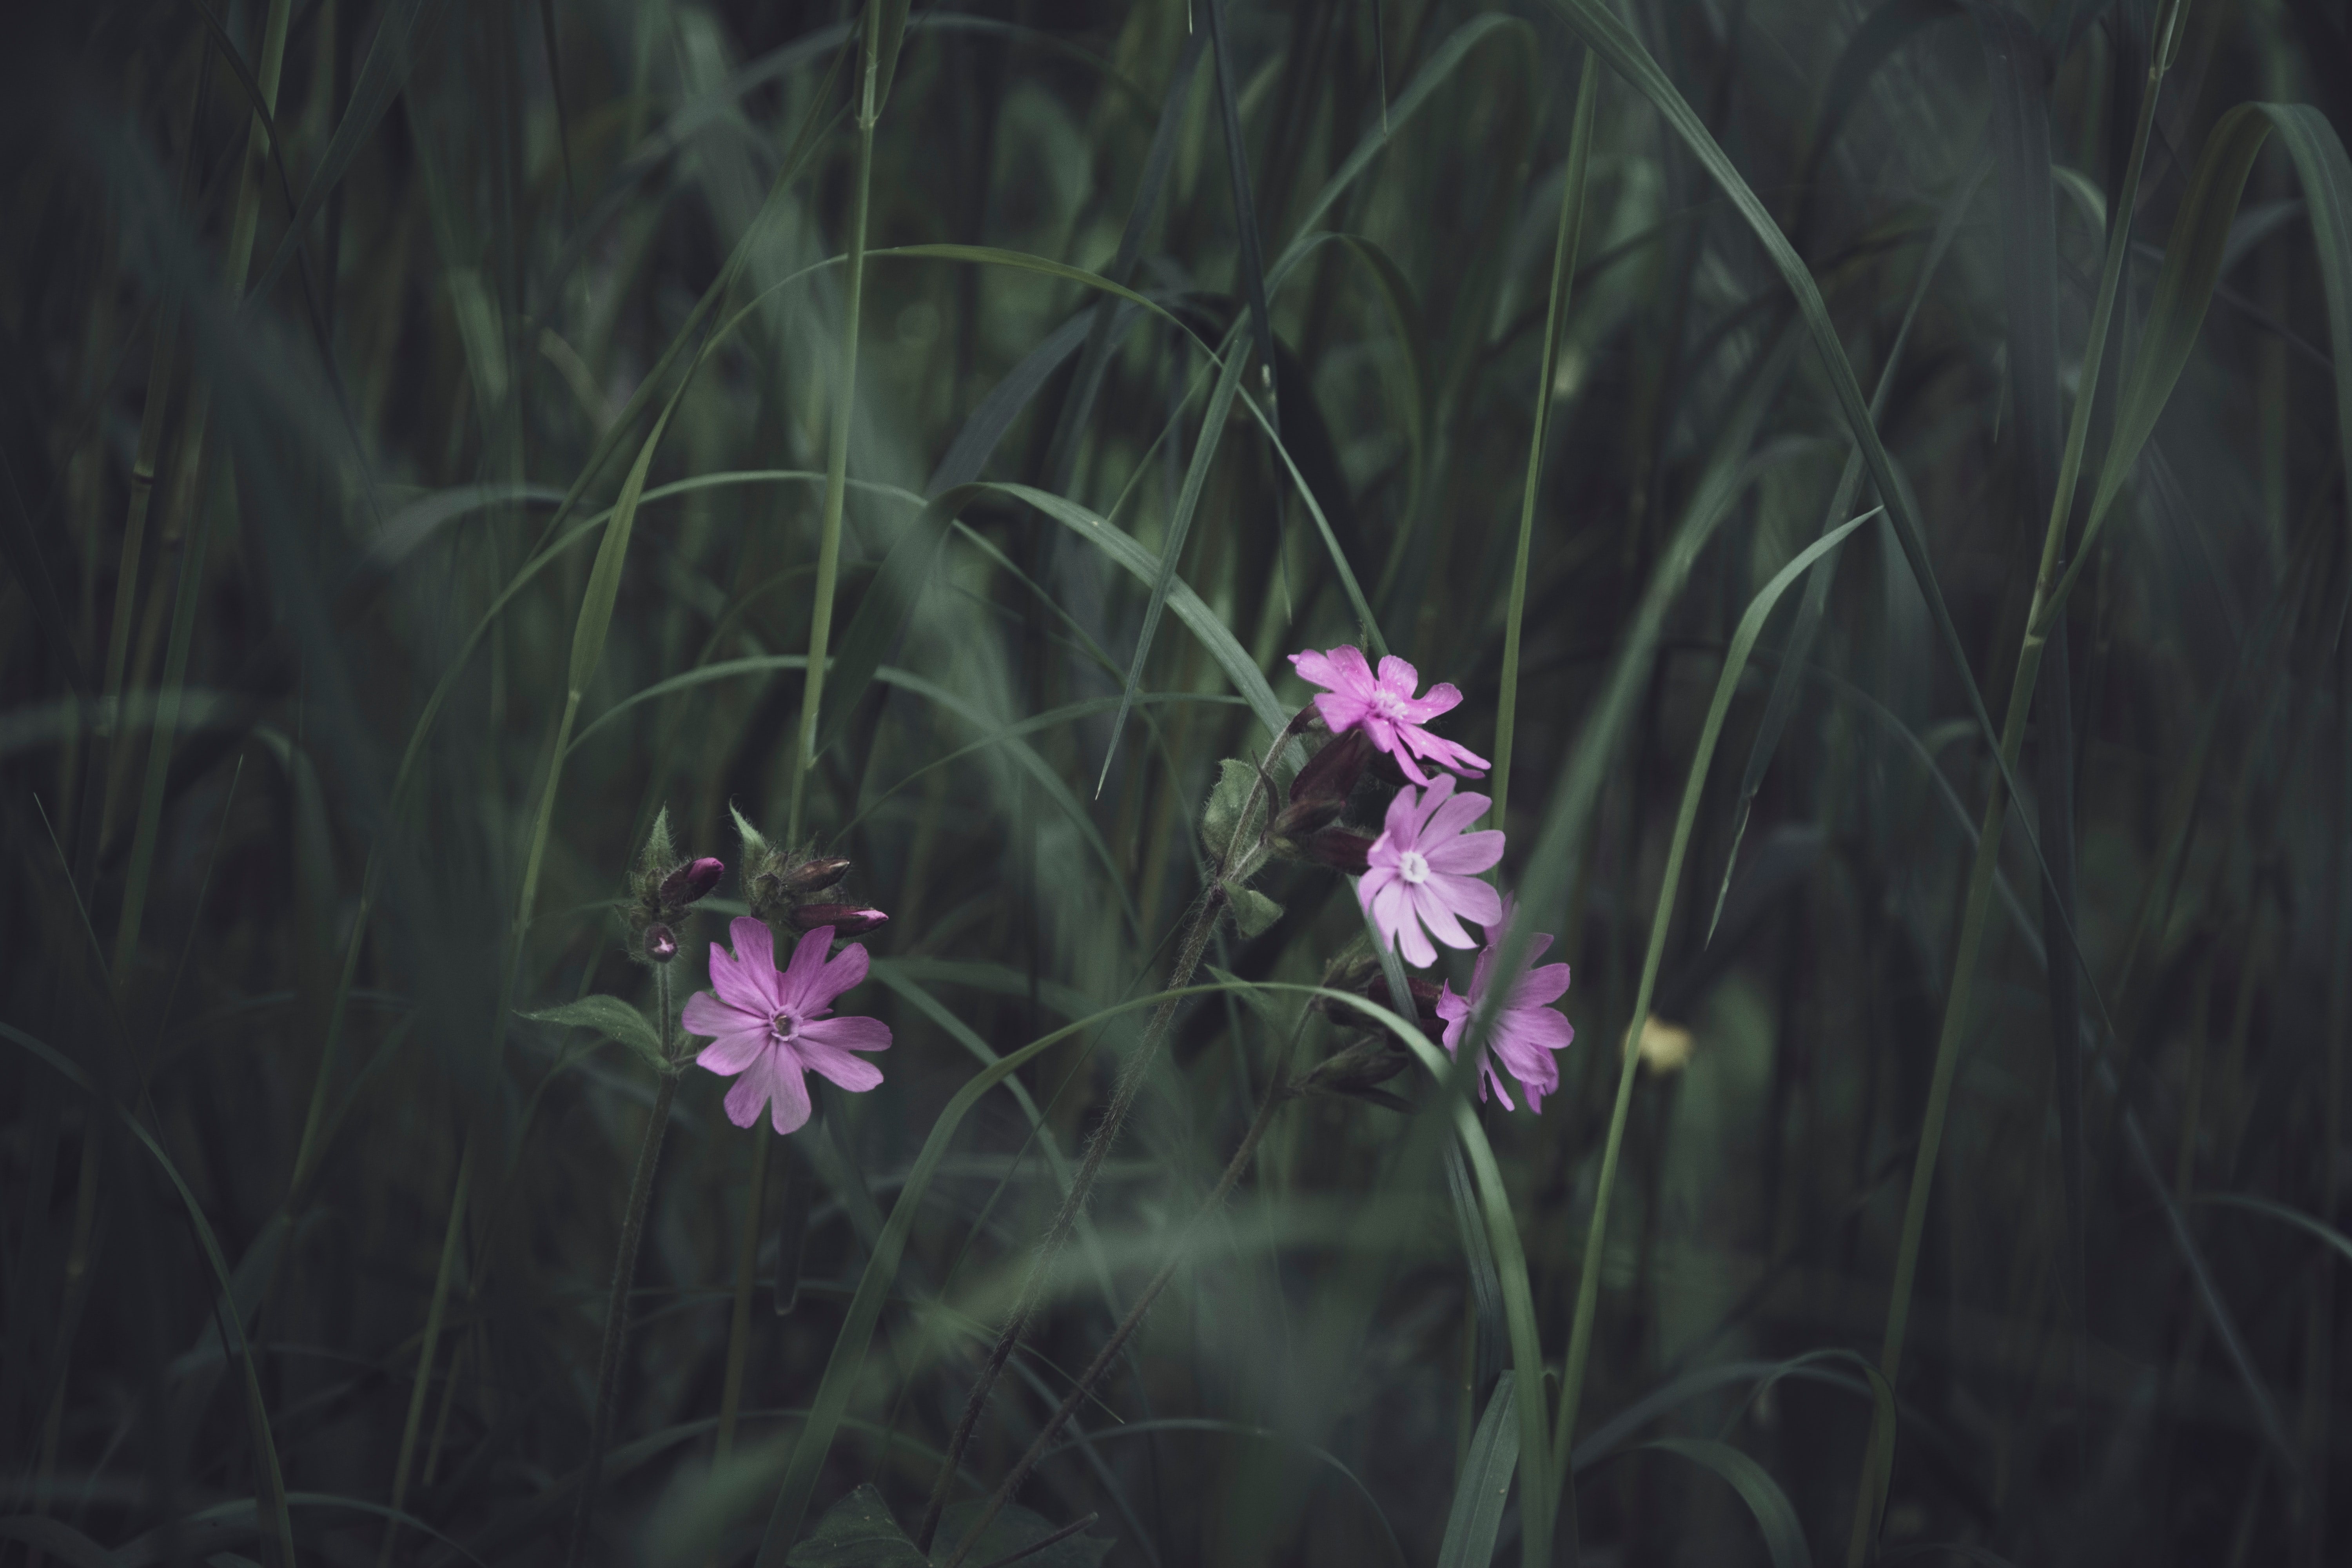 Small pink flowers among blades of grass.